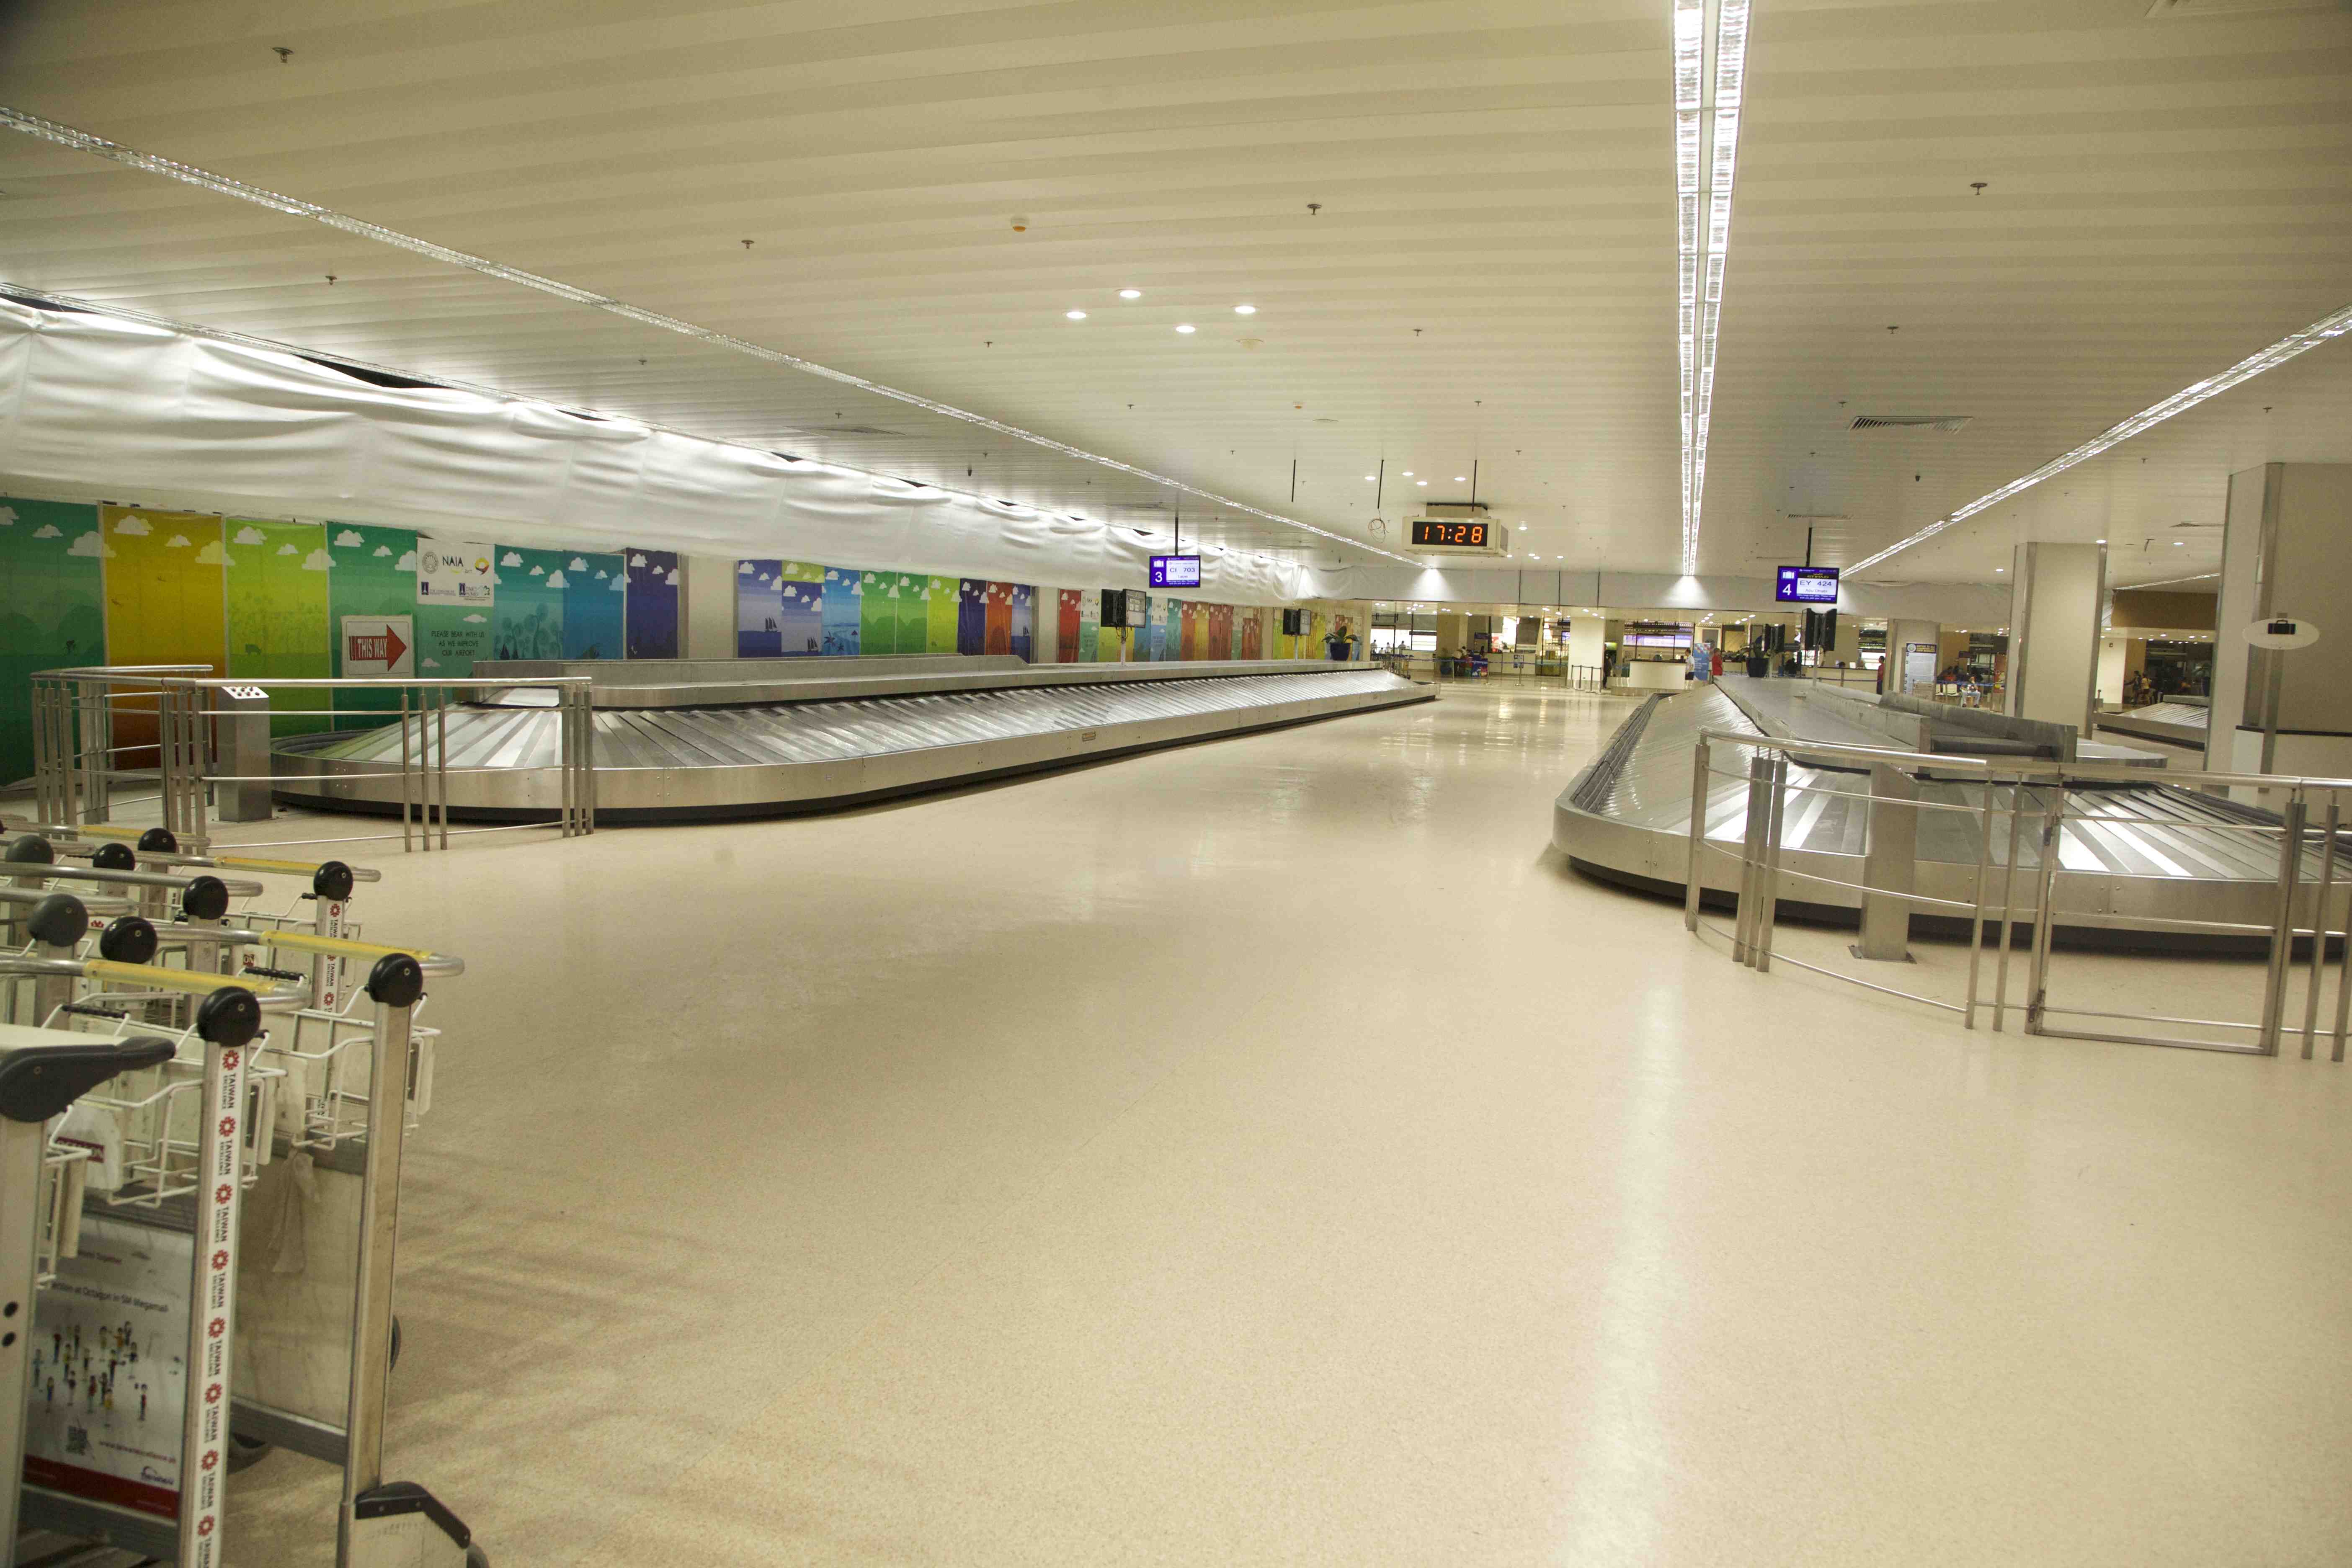 NEW. New baggage claim and conveyor area at NAIA Terminal 1.  